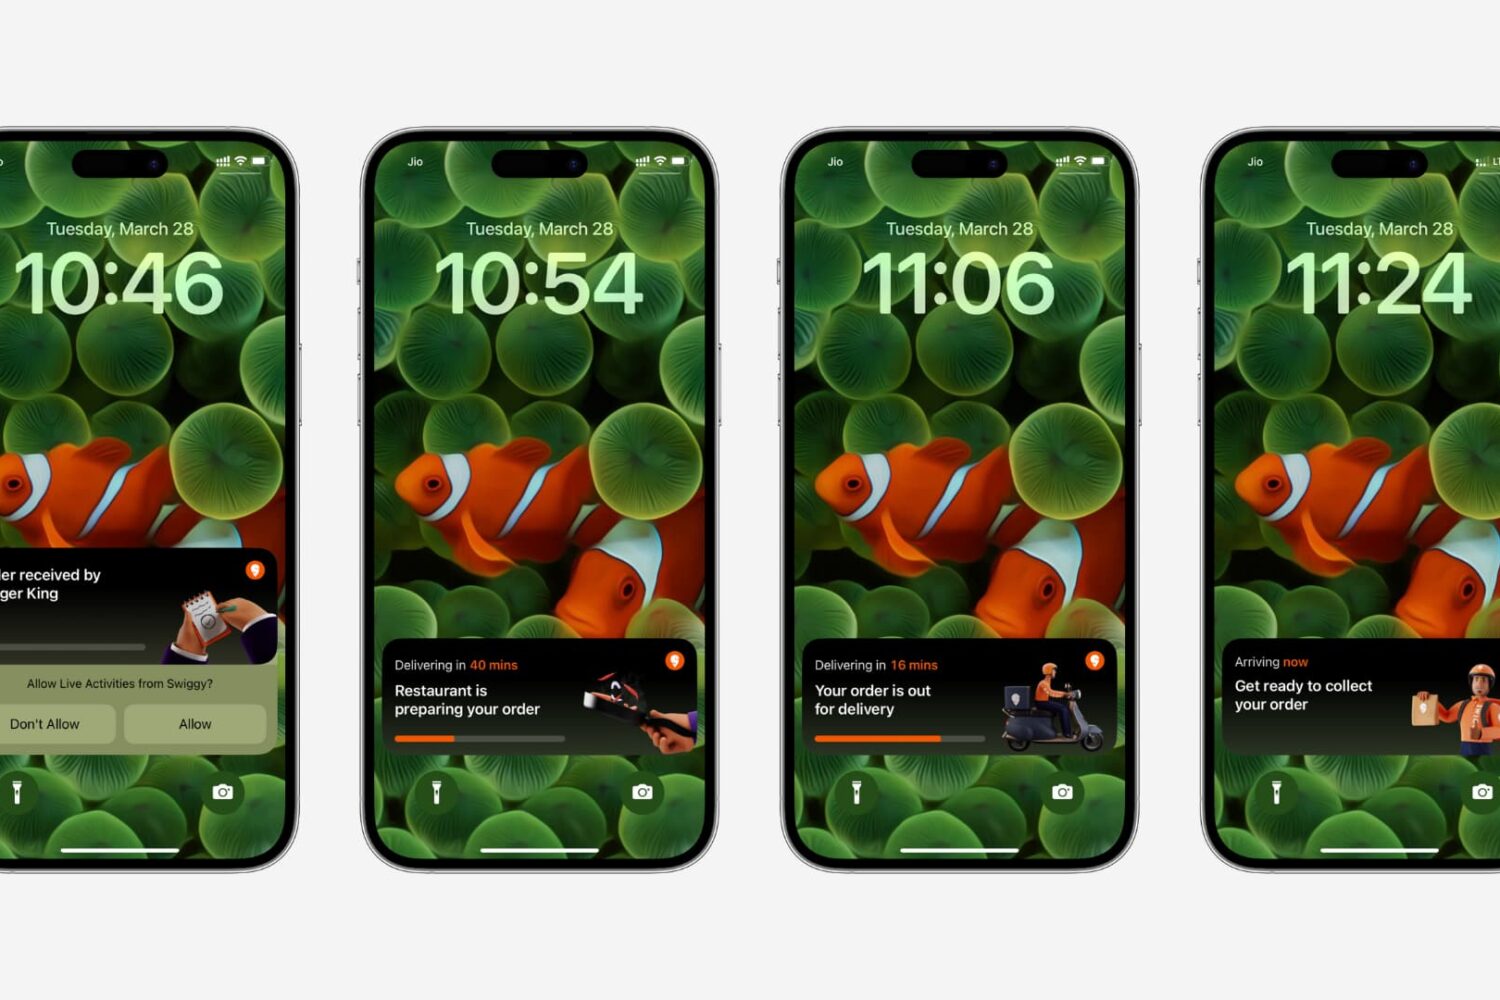 Four iPhone screenshot mockups showing Live Activities in action on the Lock Screen